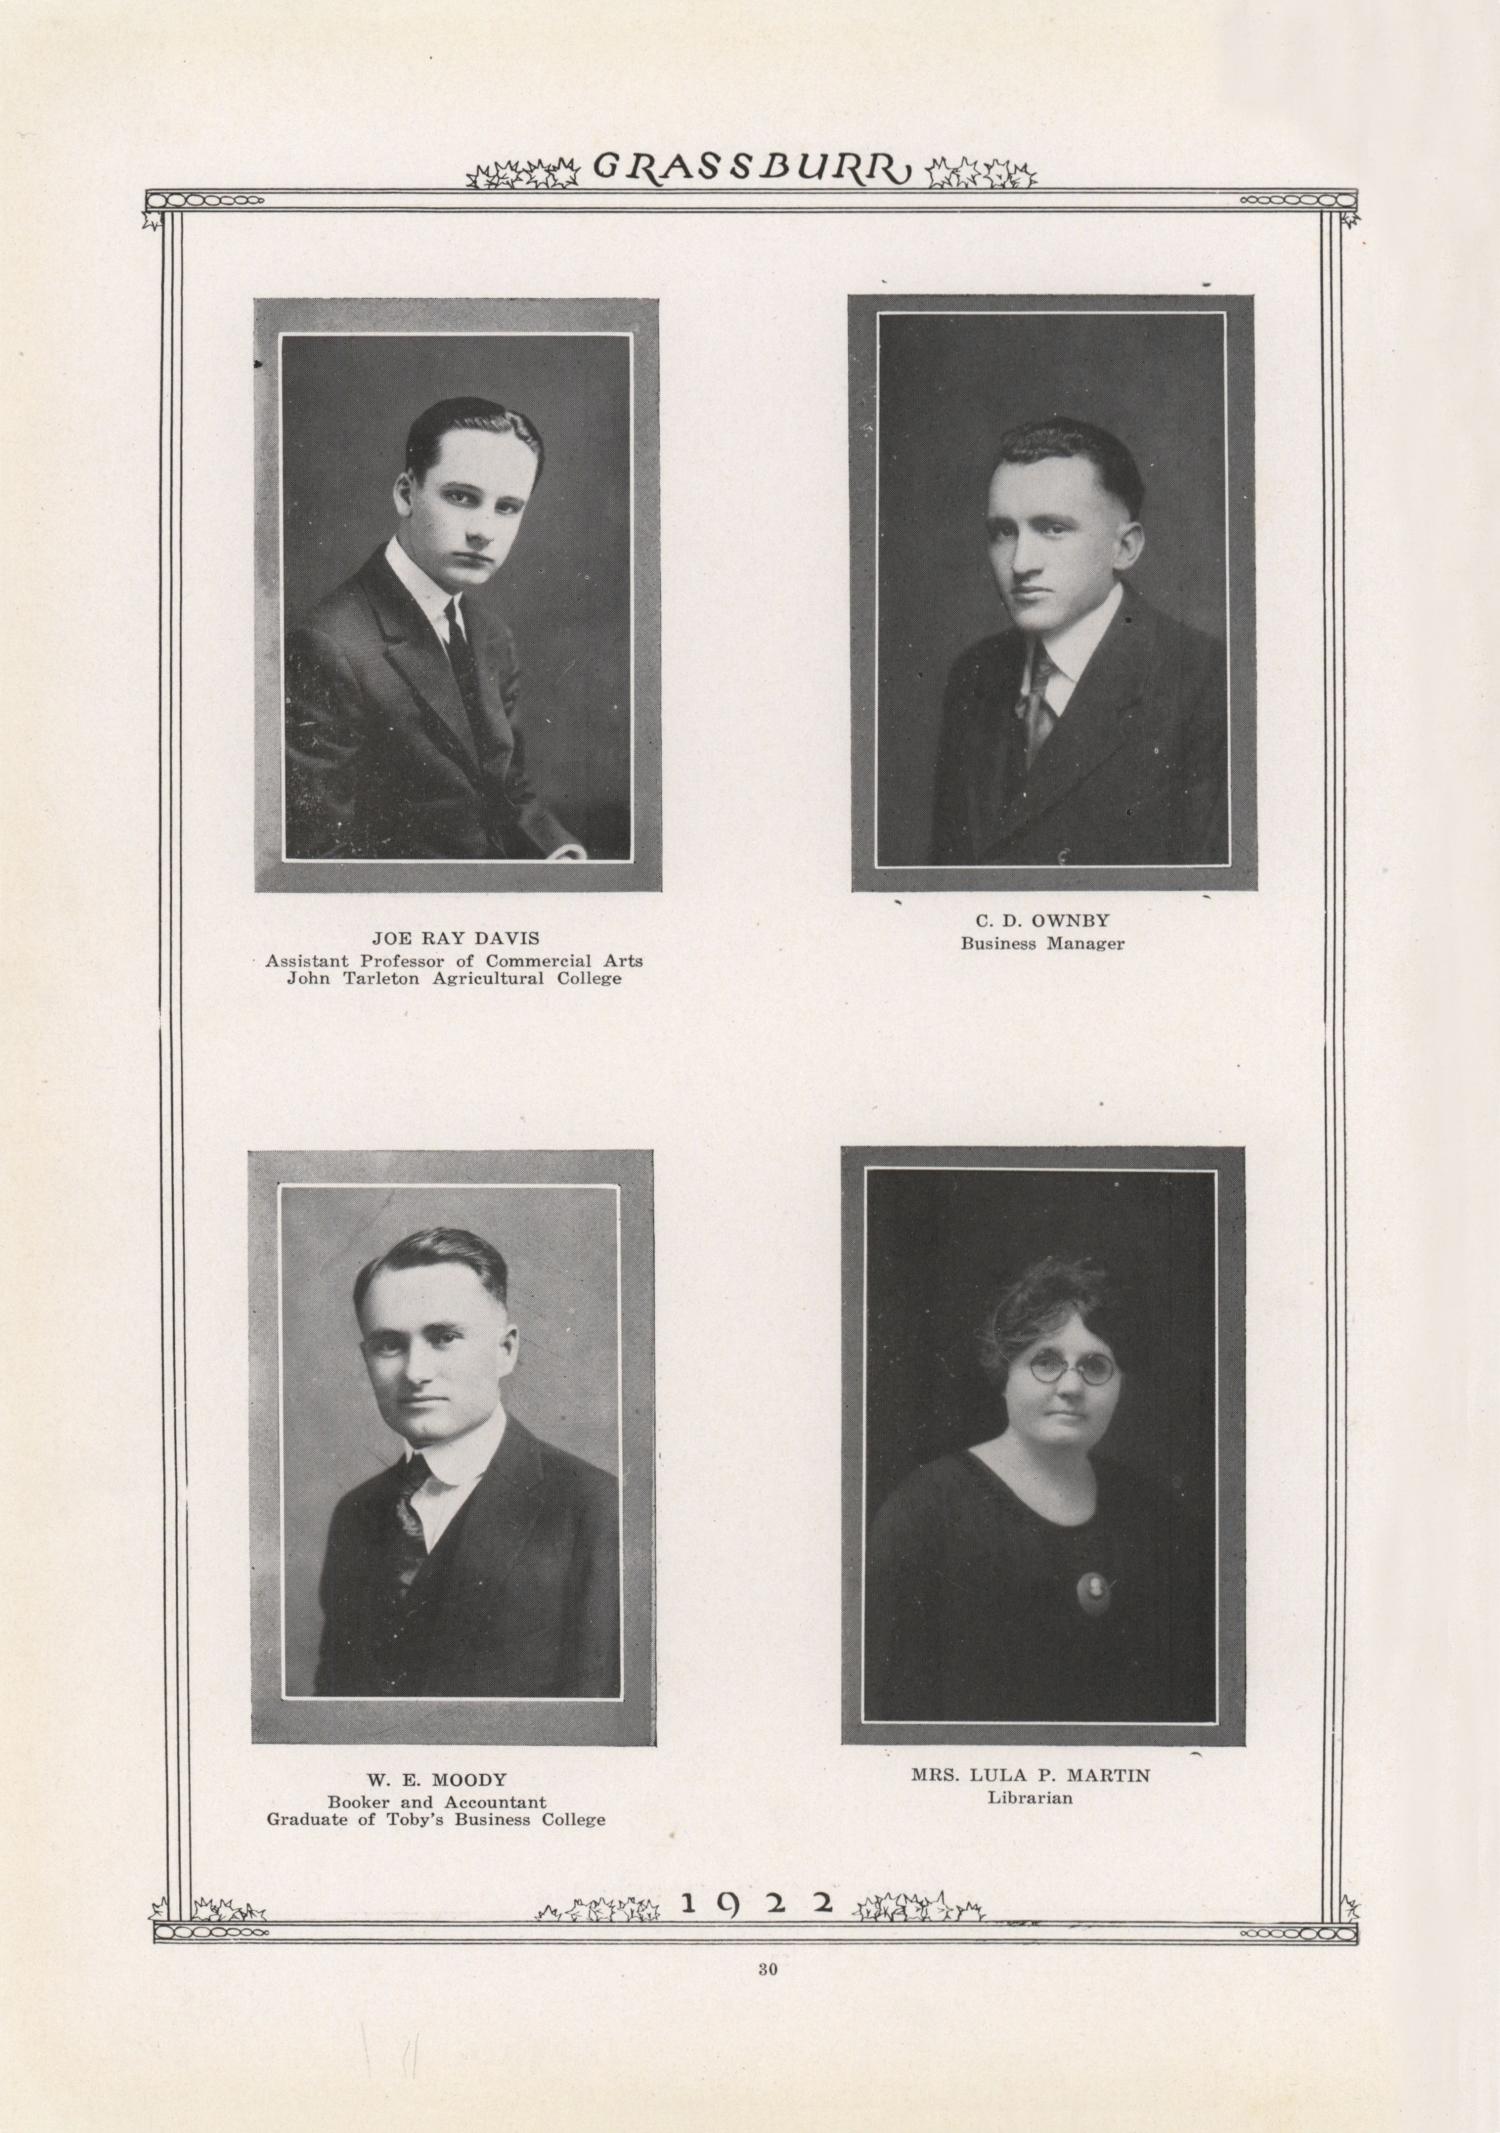 The Grassburr, Yearbook of John Tarleton Agricultural College, 1922
                                                
                                                    30
                                                